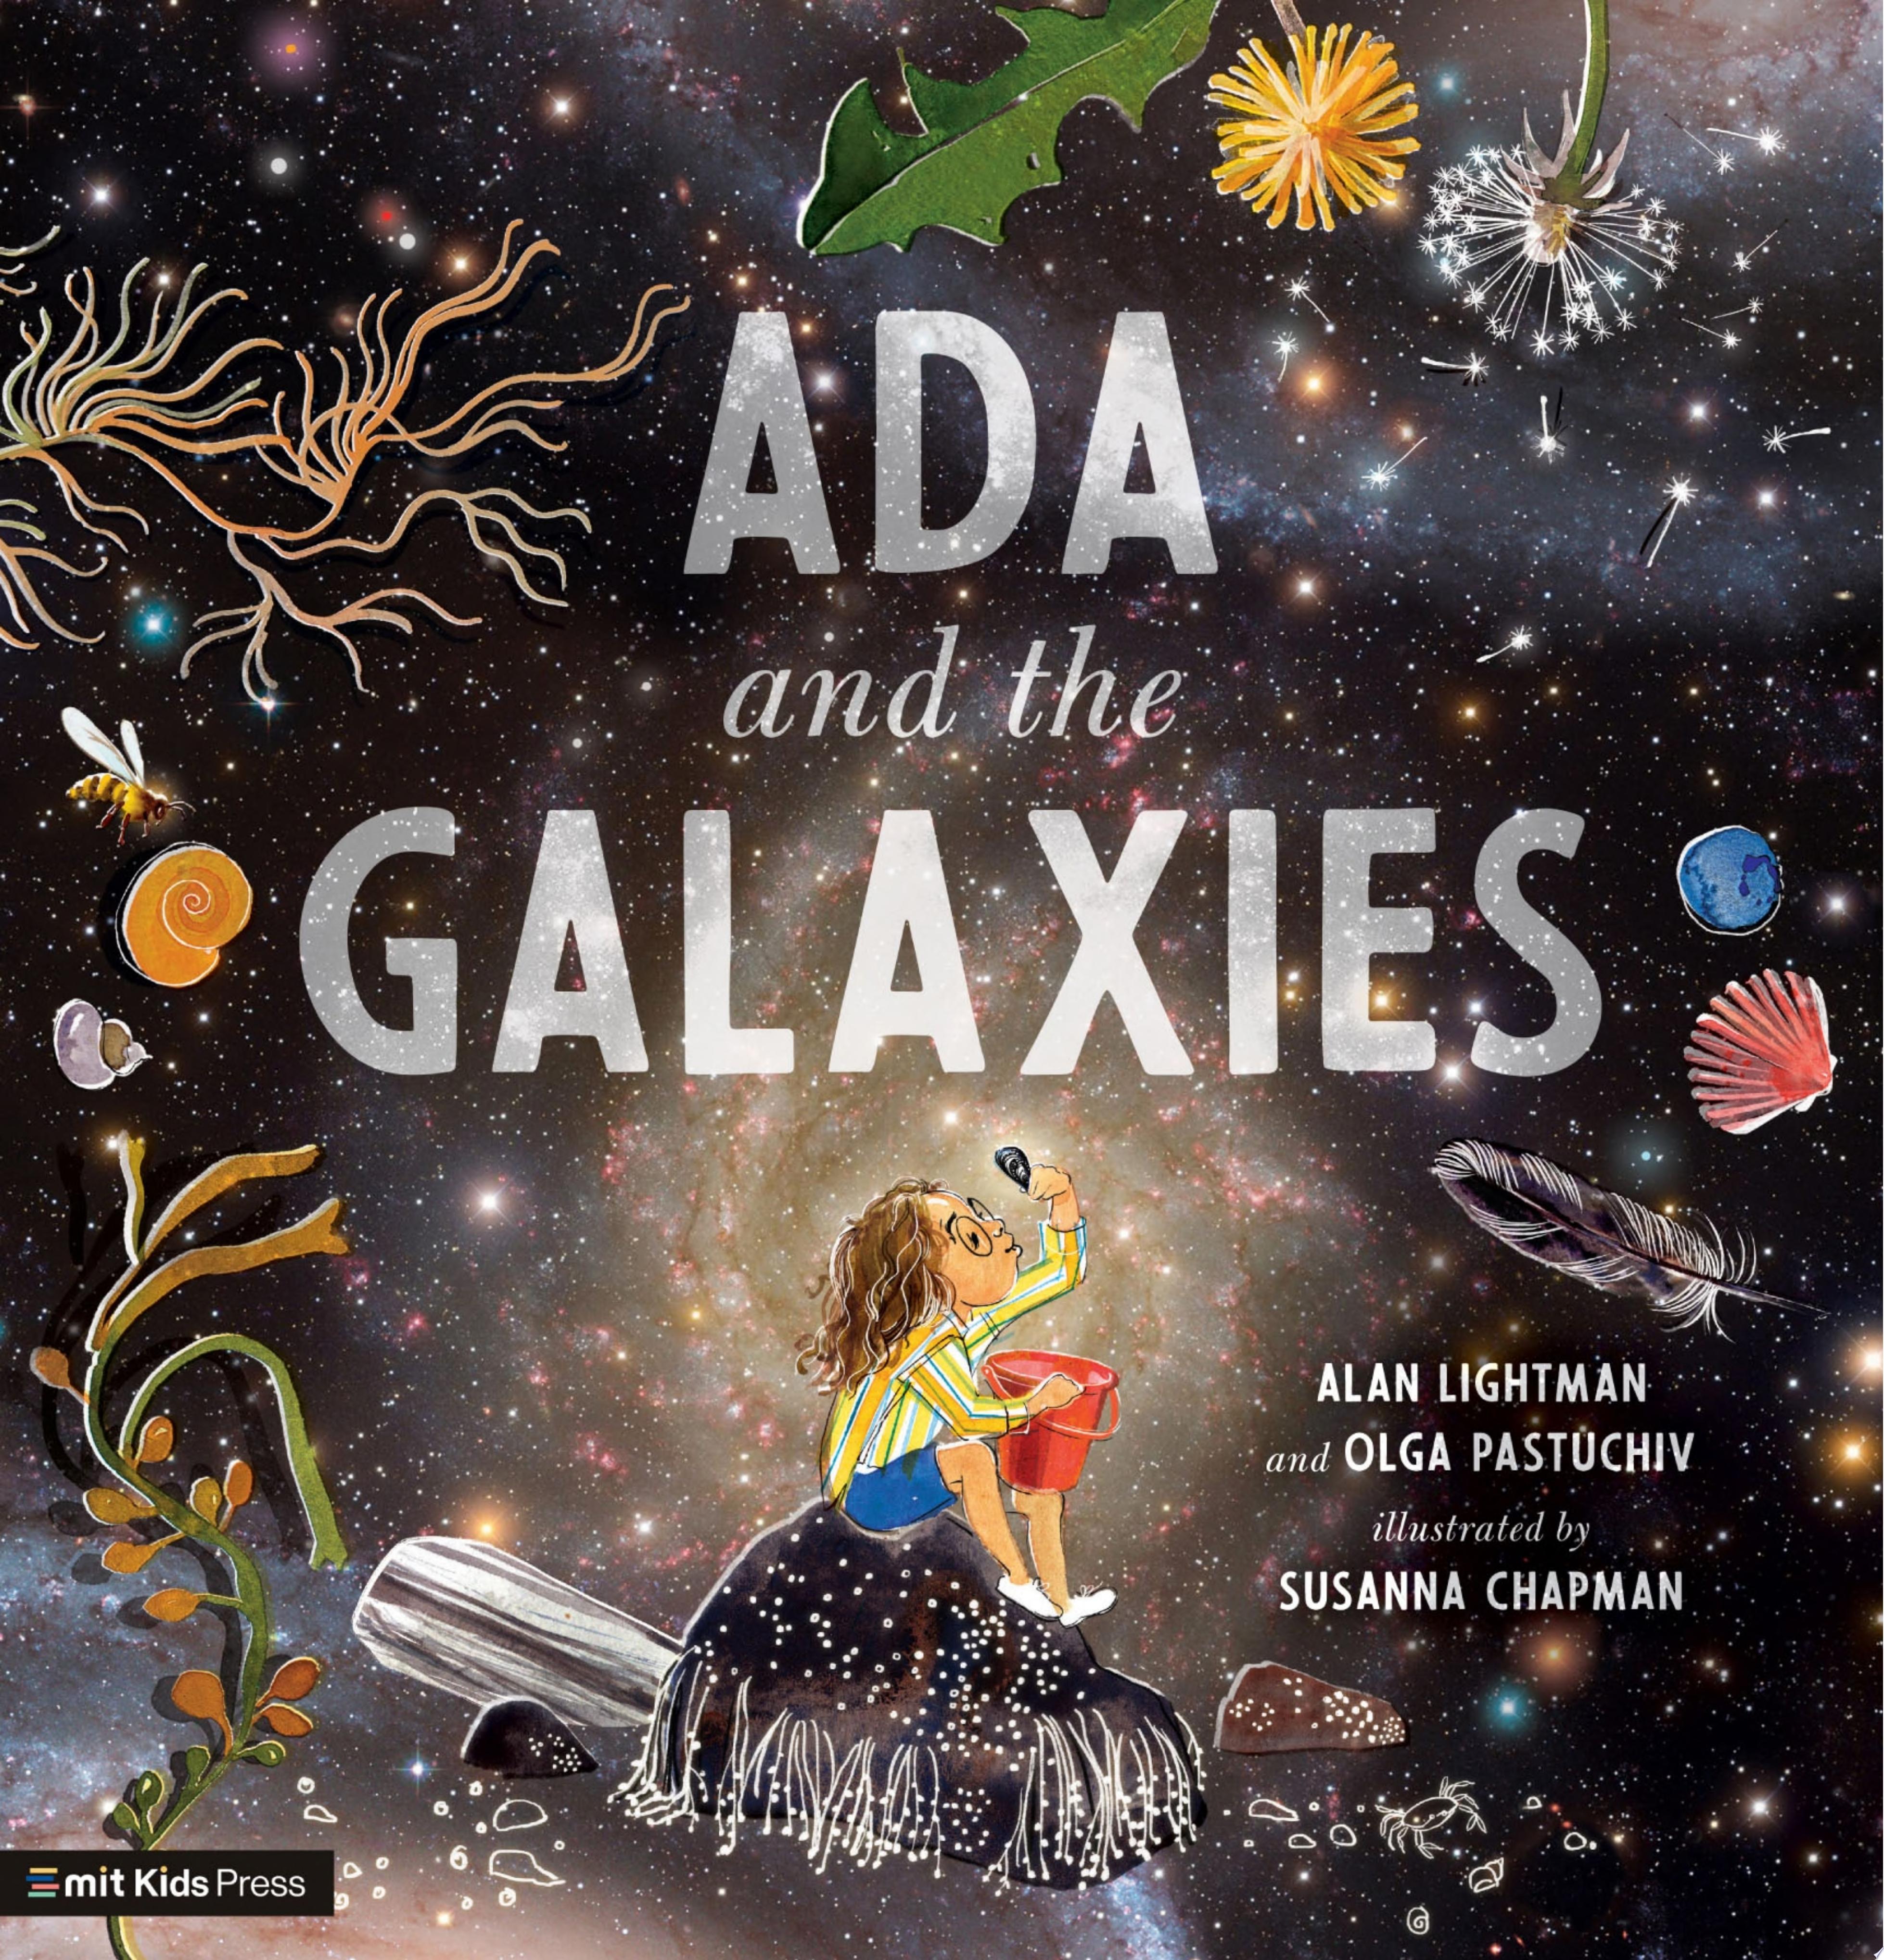 Image for "Ada and the Galaxies"